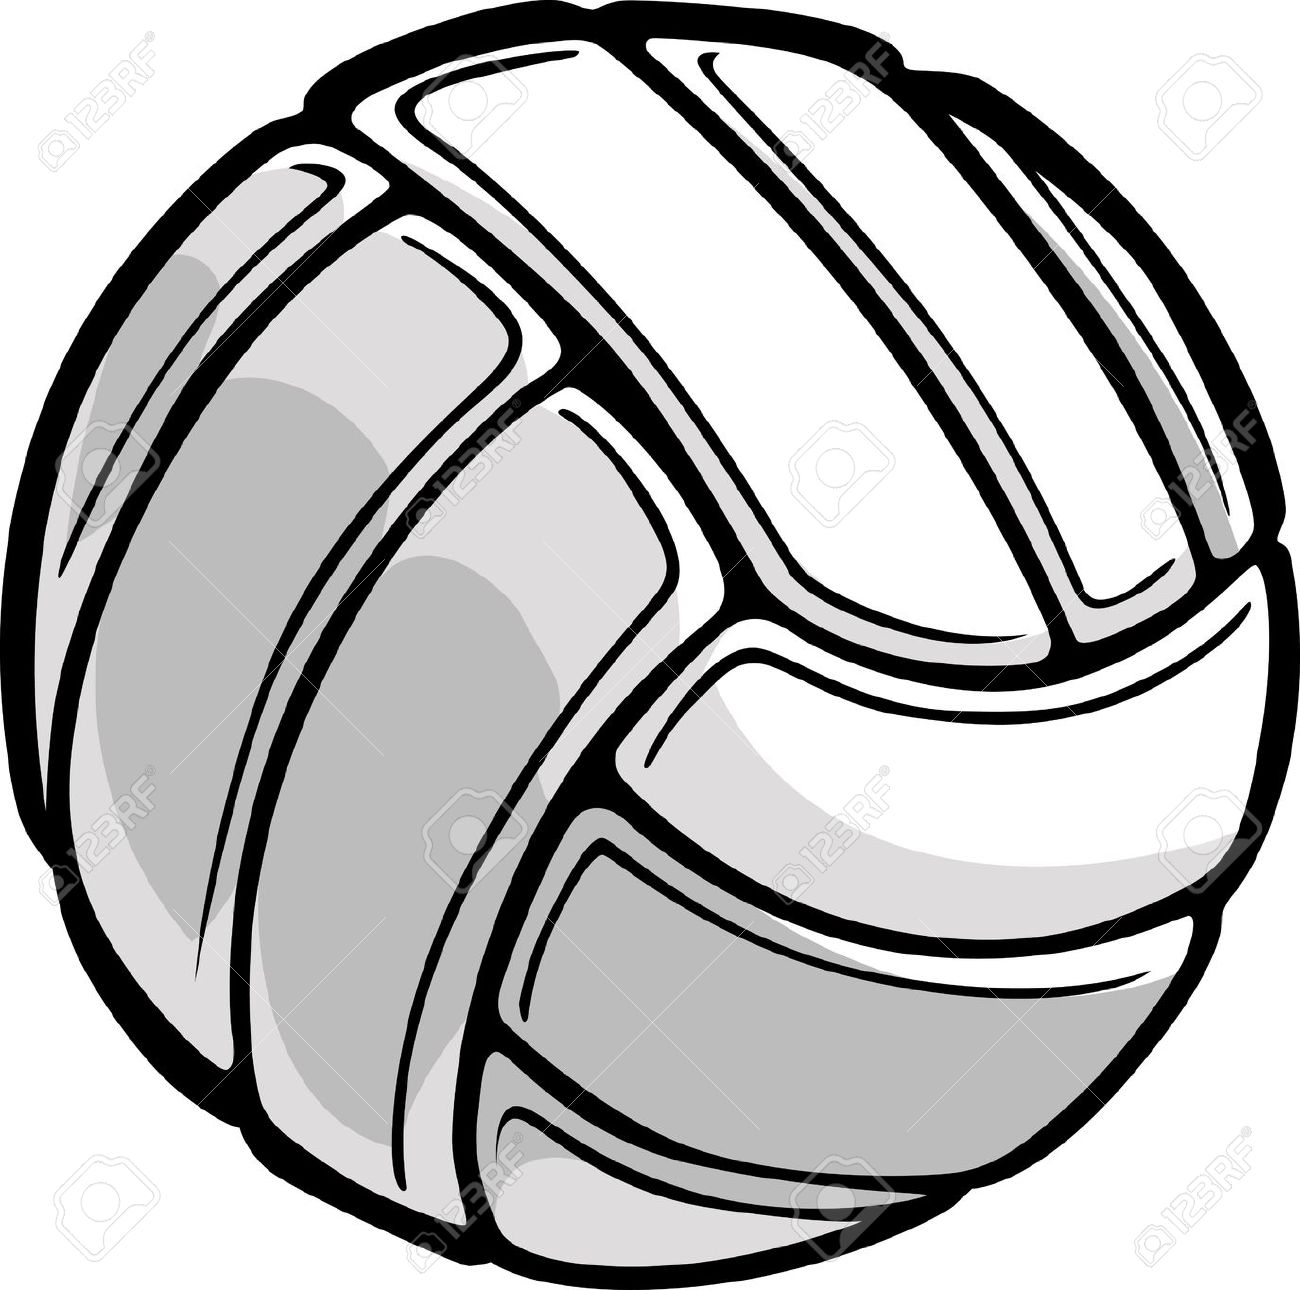 Free Volleyball Clip Art, Download Free Clip Art, Free Clip.